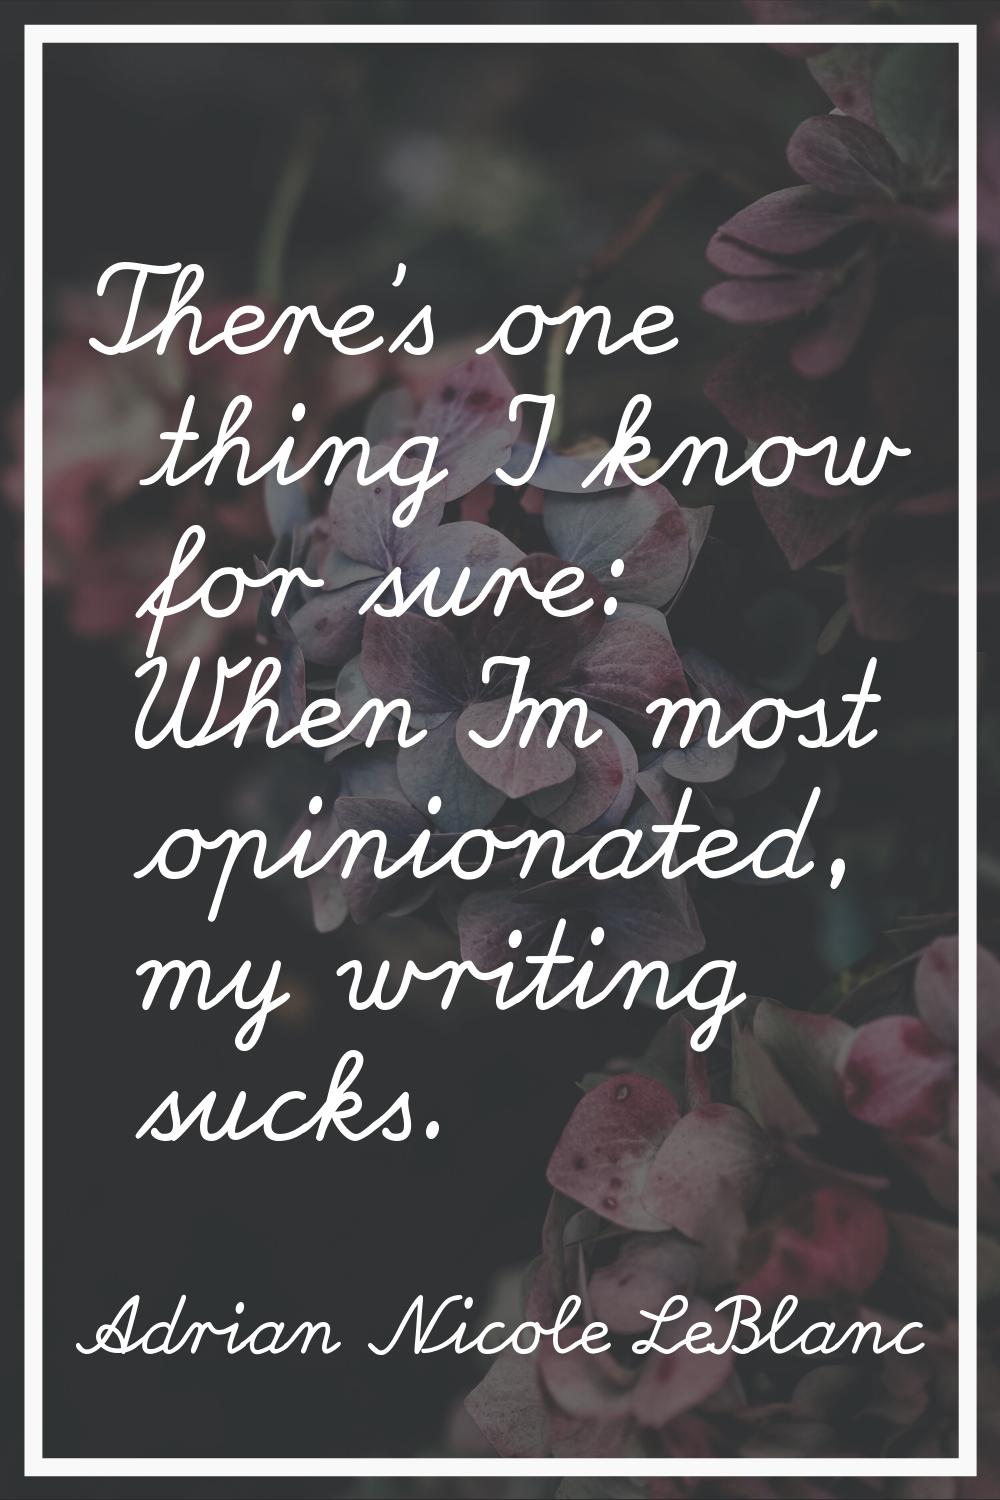 There's one thing I know for sure: When I'm most opinionated, my writing sucks.